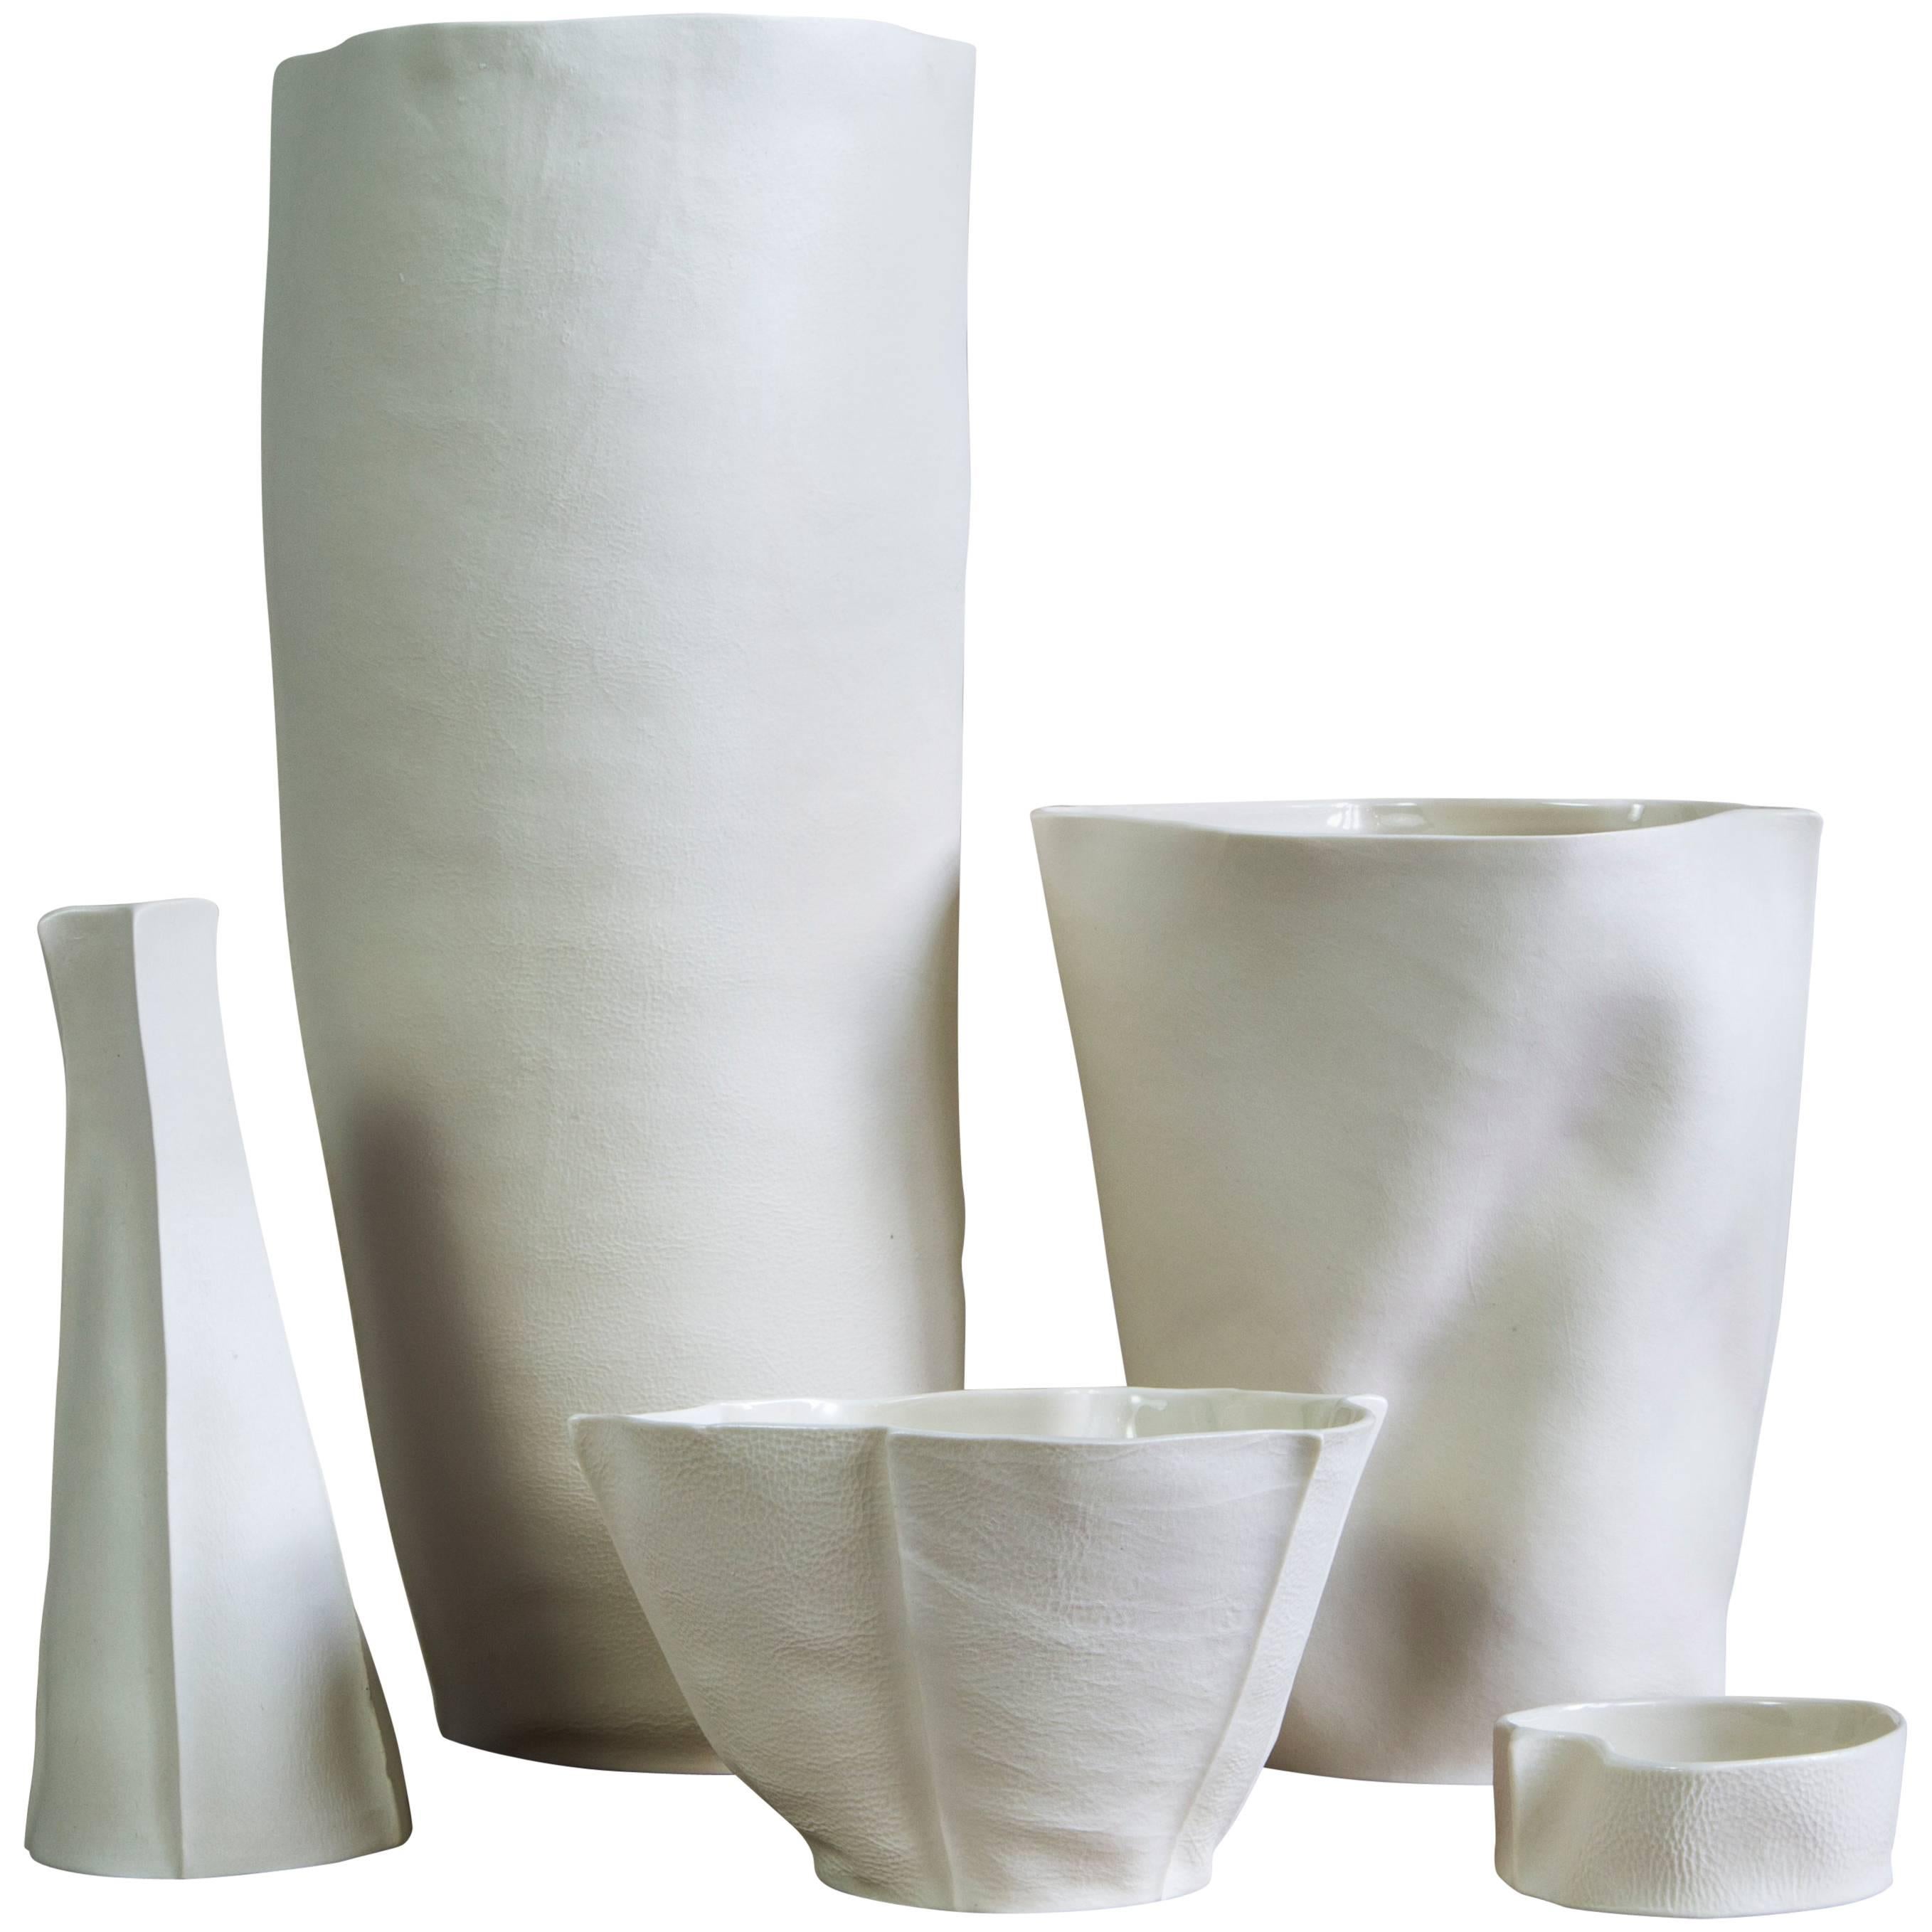 Set of Five Kawa Porcelain Pieces, in stock